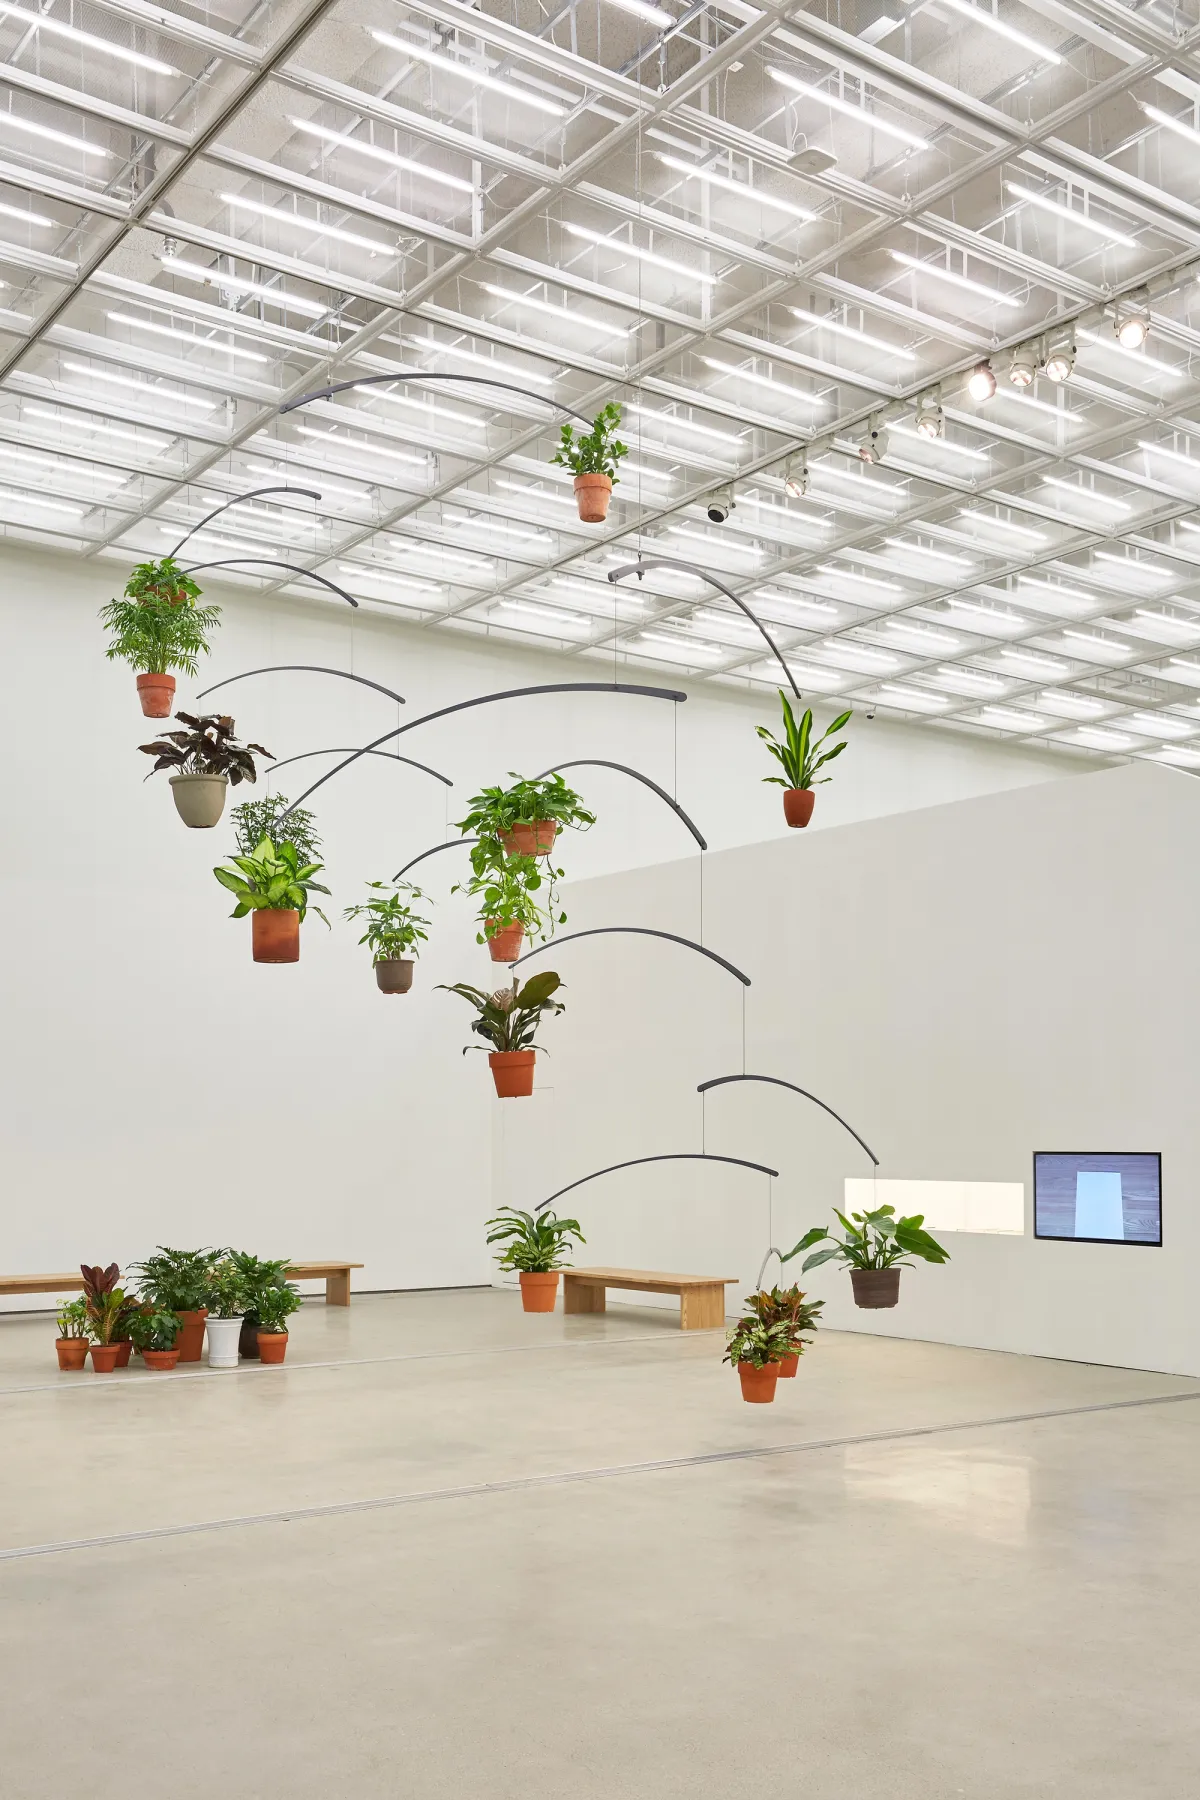 A bright gallery room filled with houseplants in pots hanging from the ceiling, intertwined with curved wooden sticks.